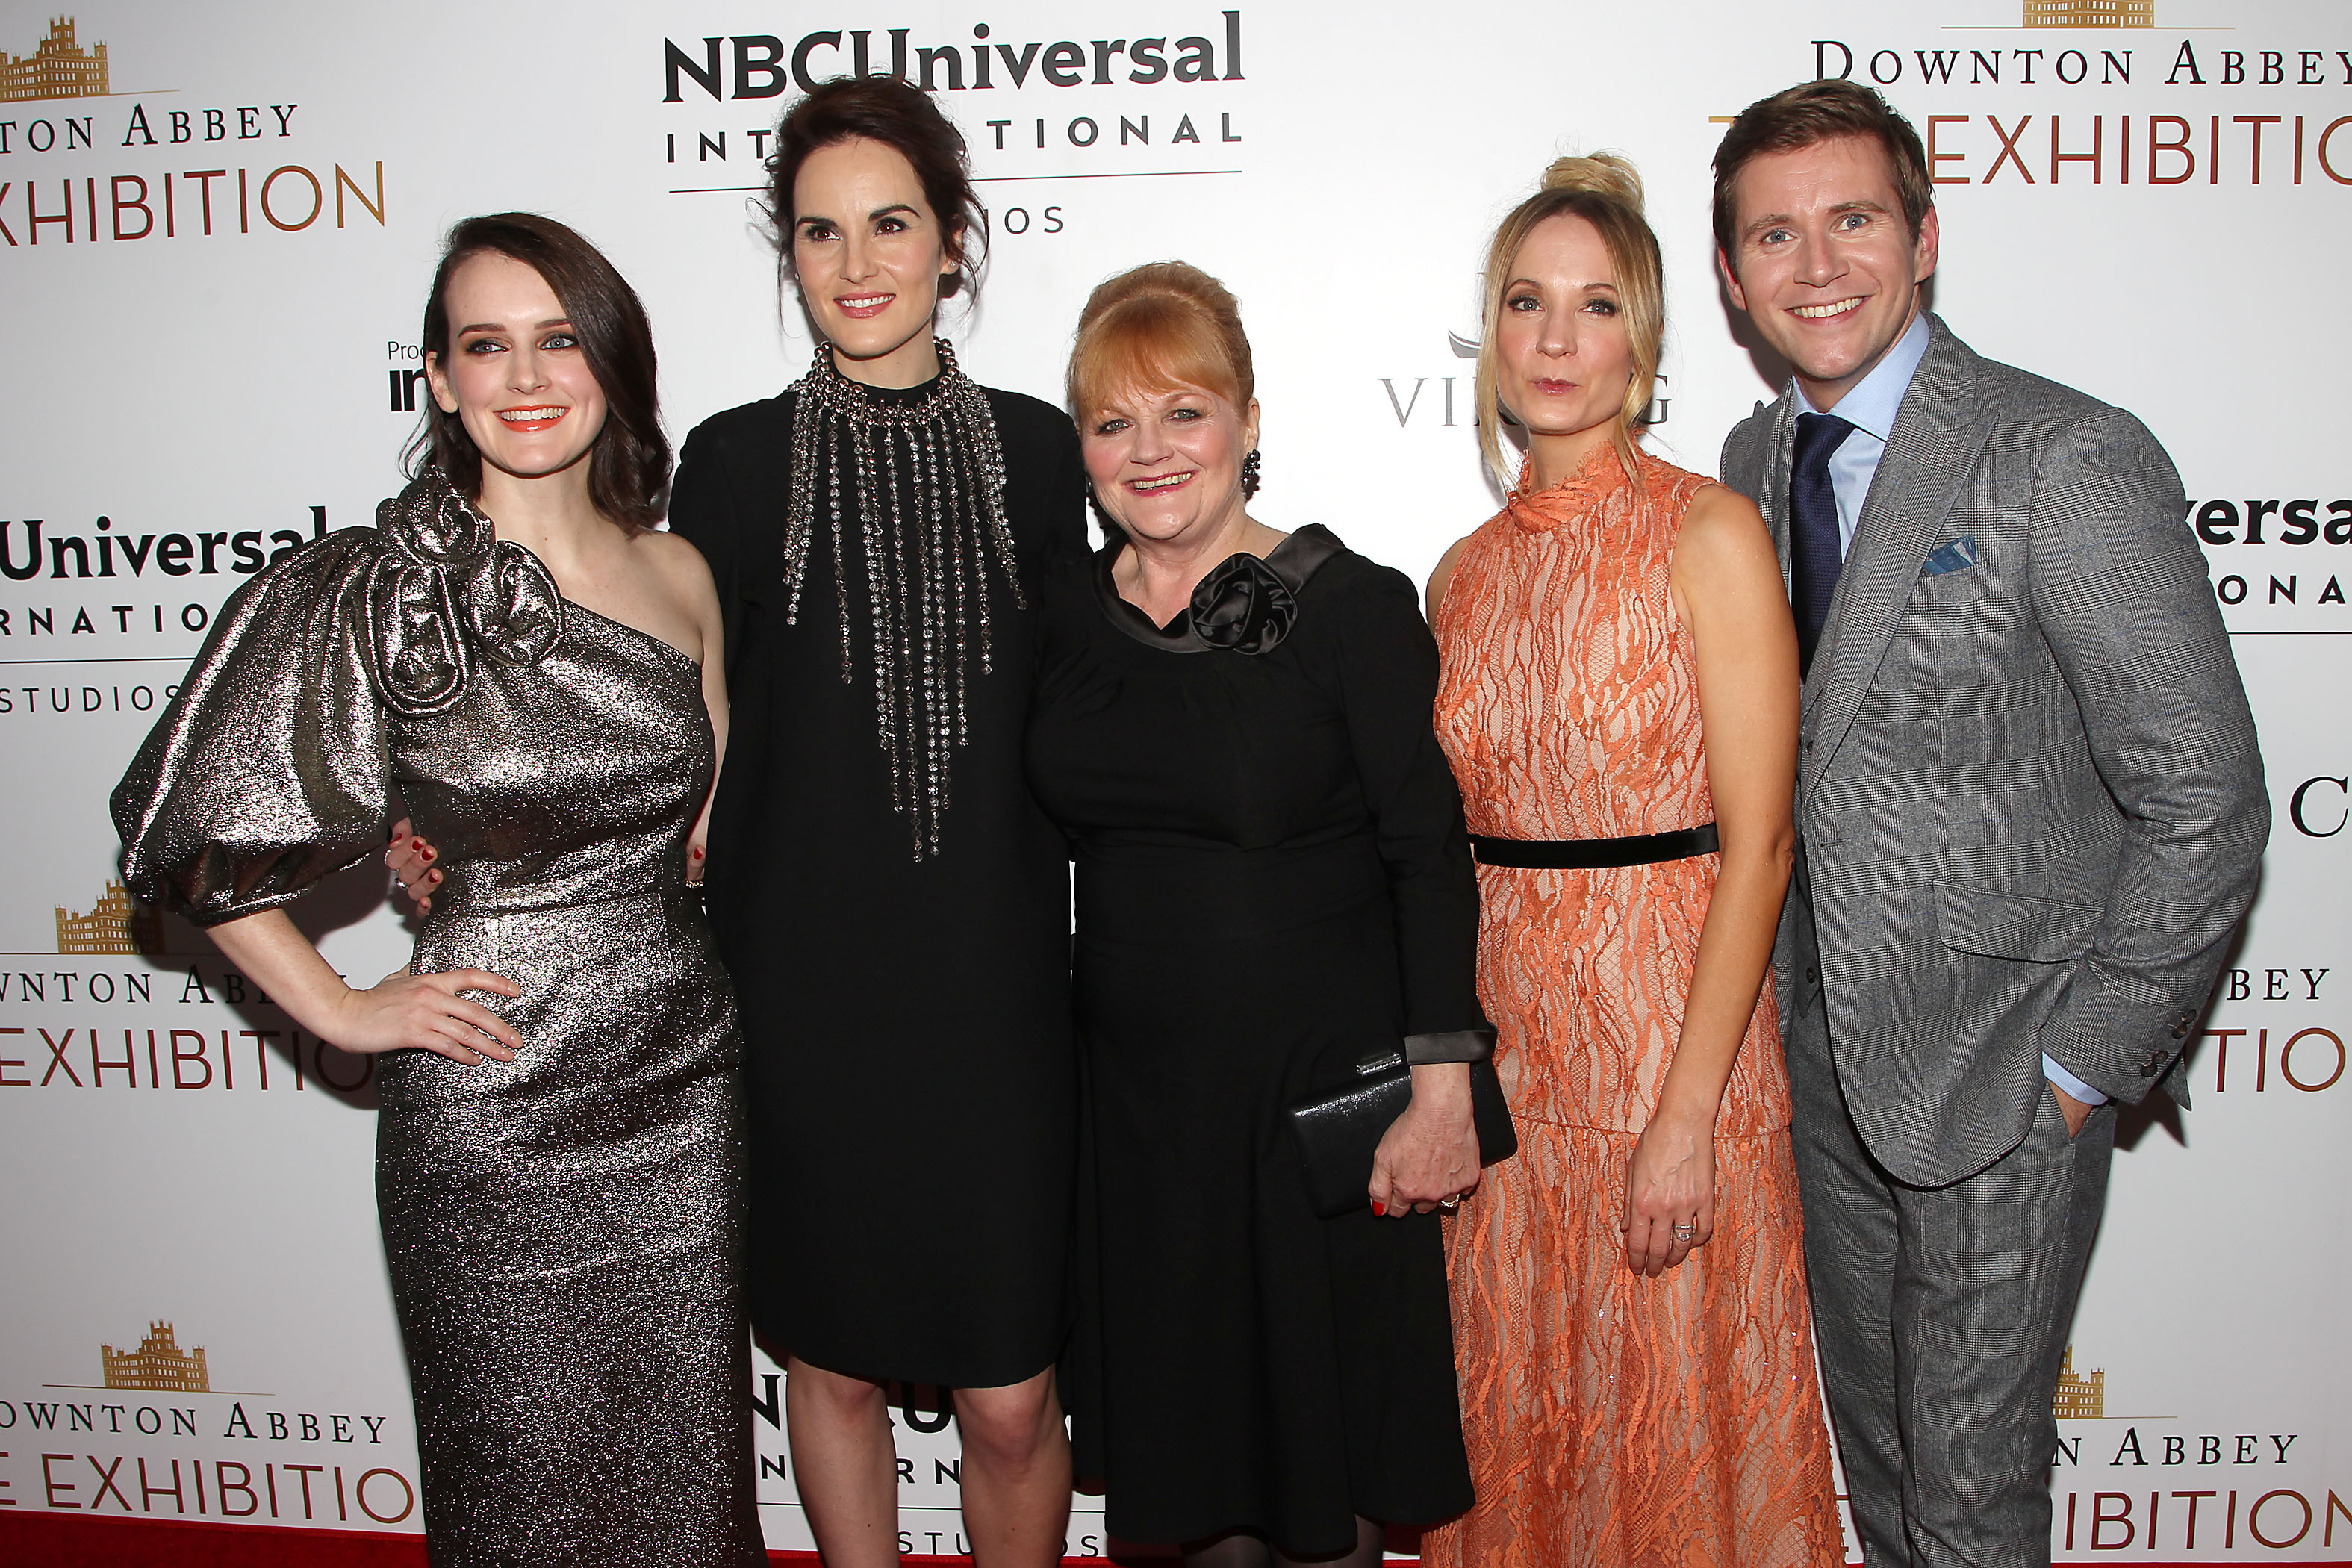 Downton Abbey Movie Adds More Stars to its Cast List - EverydayKoala